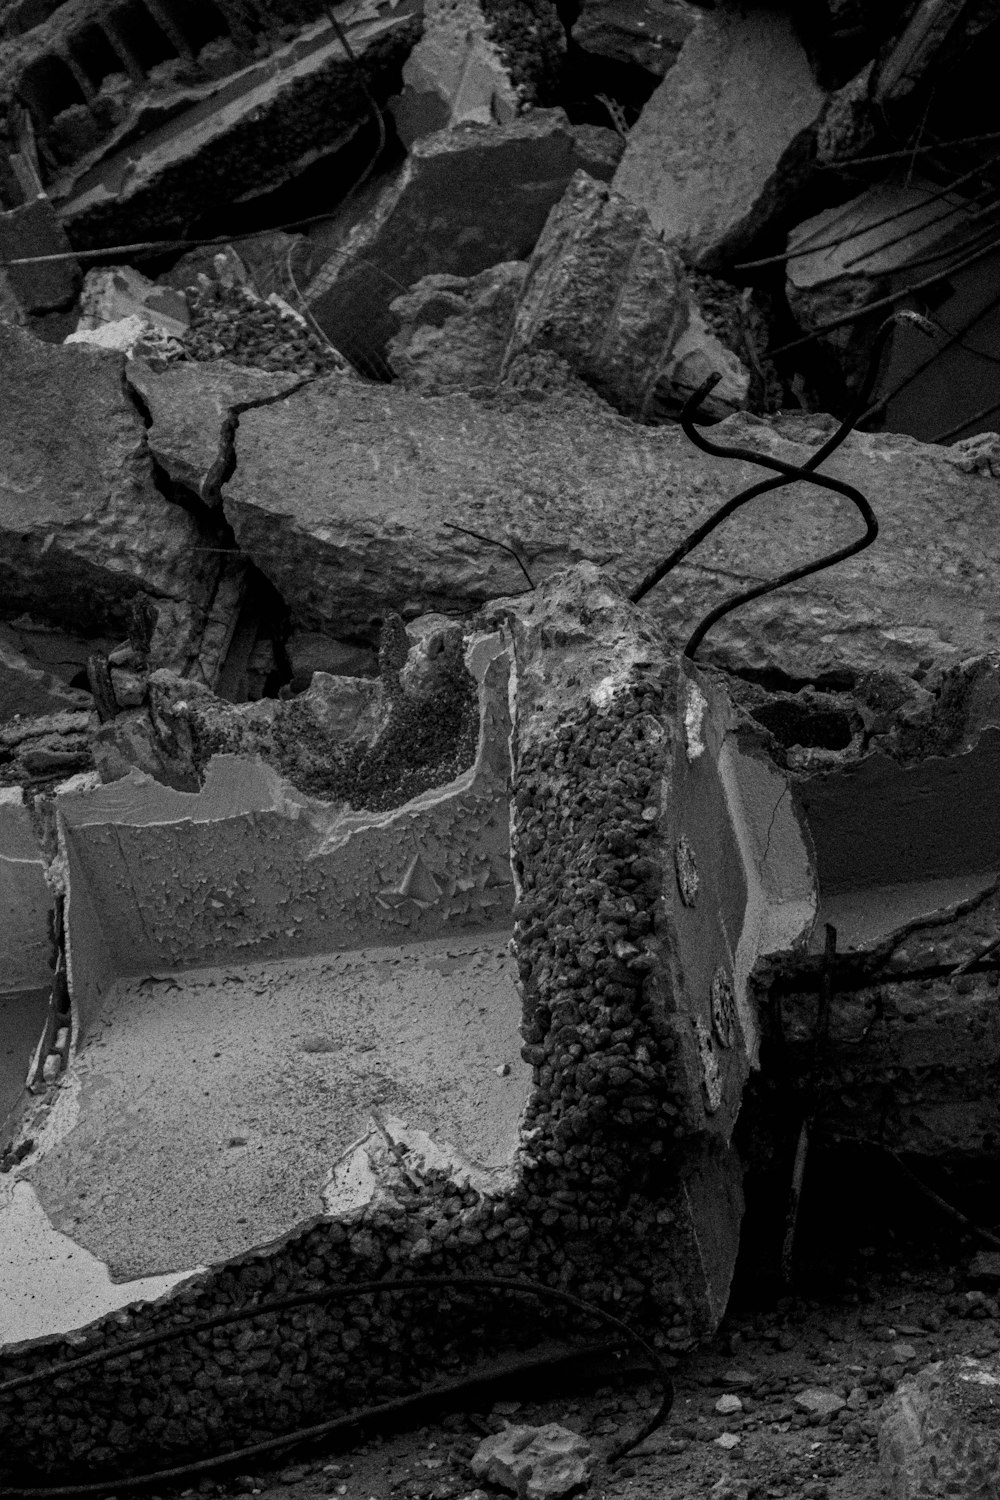 a black and white photo of a pile of rubble